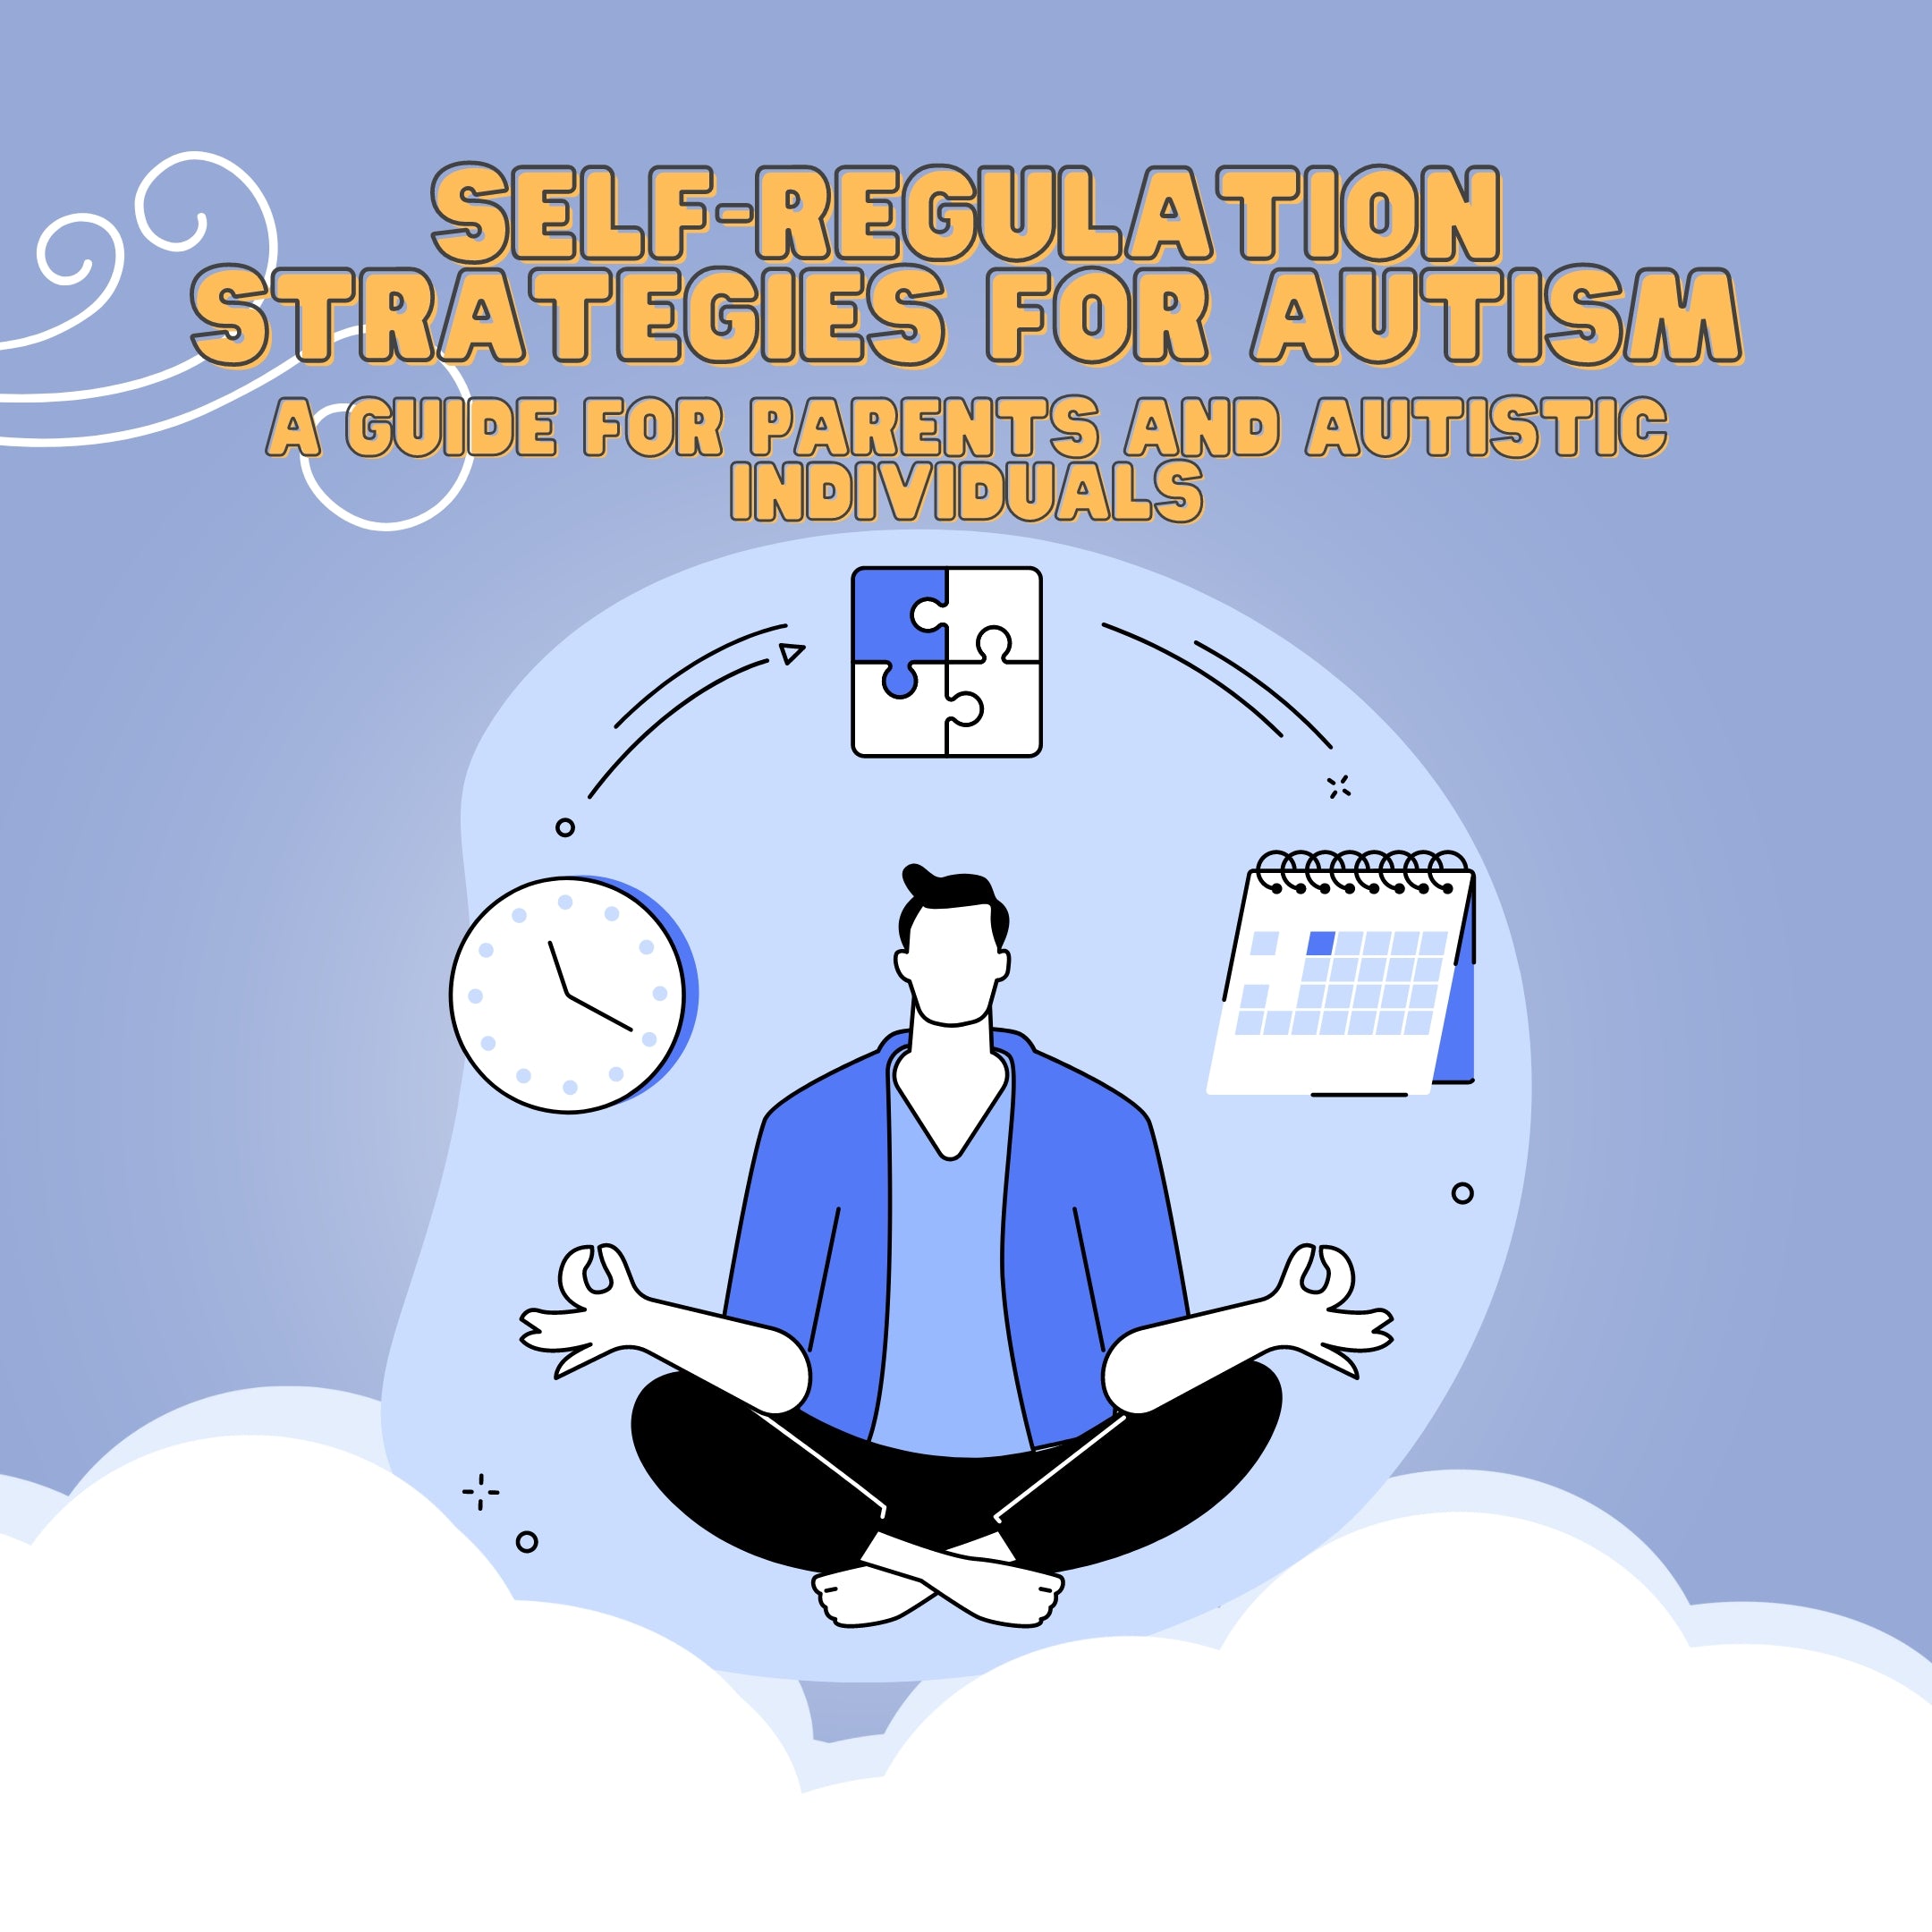 Self-Regulation Strategies for Autism: A Guide for Parents and Autistic Individuals